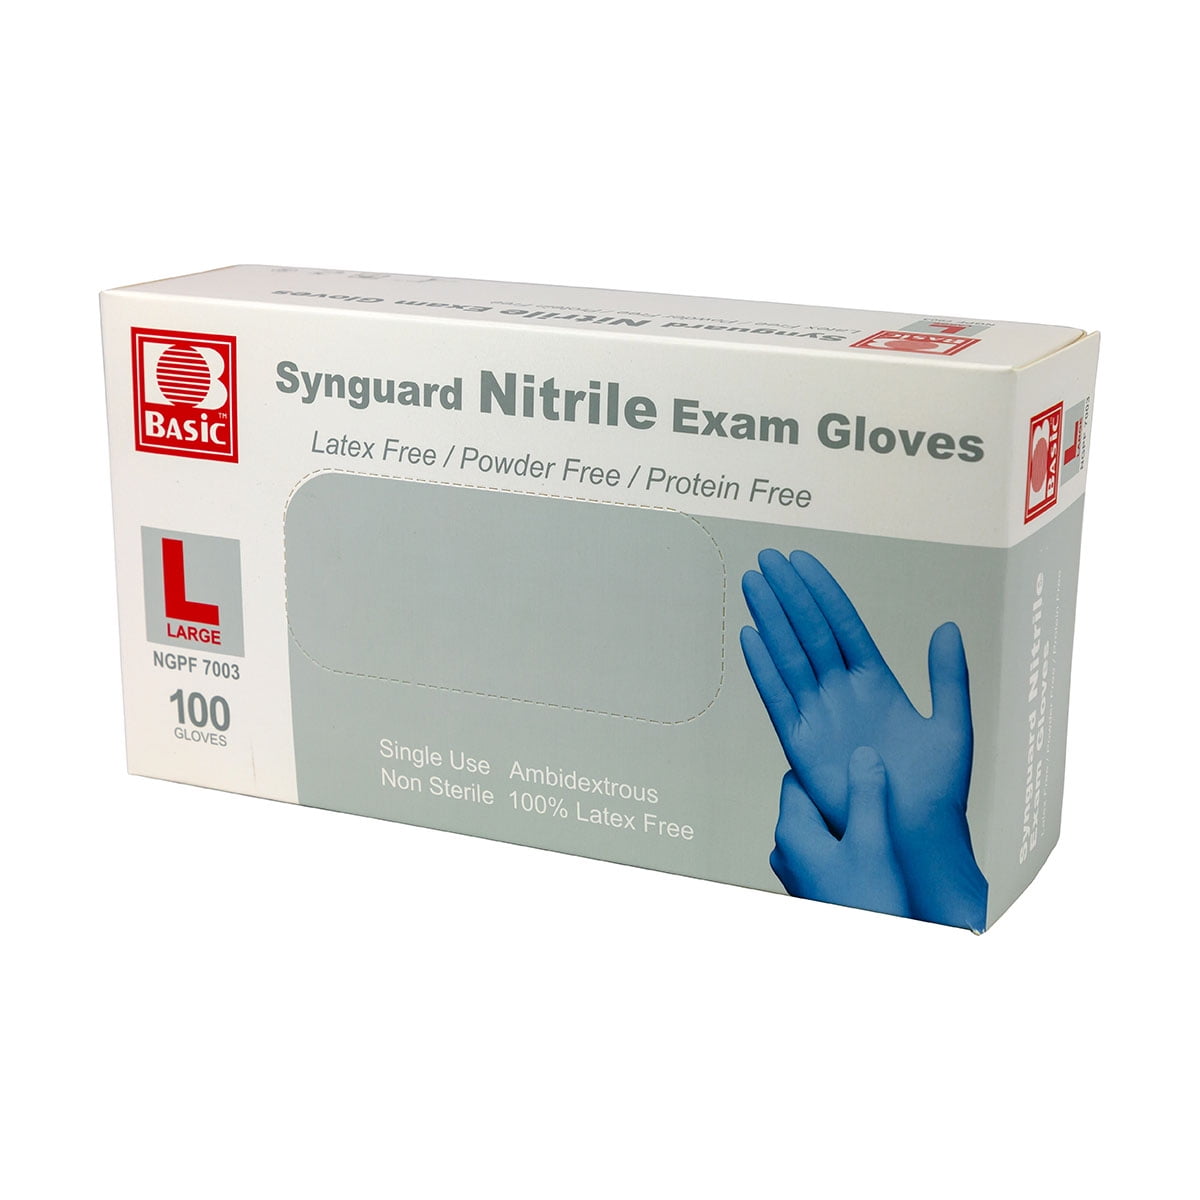 OhradWord Industrial Exam Blue Nitrile Gloves Size Large Latex Free Box of 100 Disposable Small, Black Powder Free Textured 